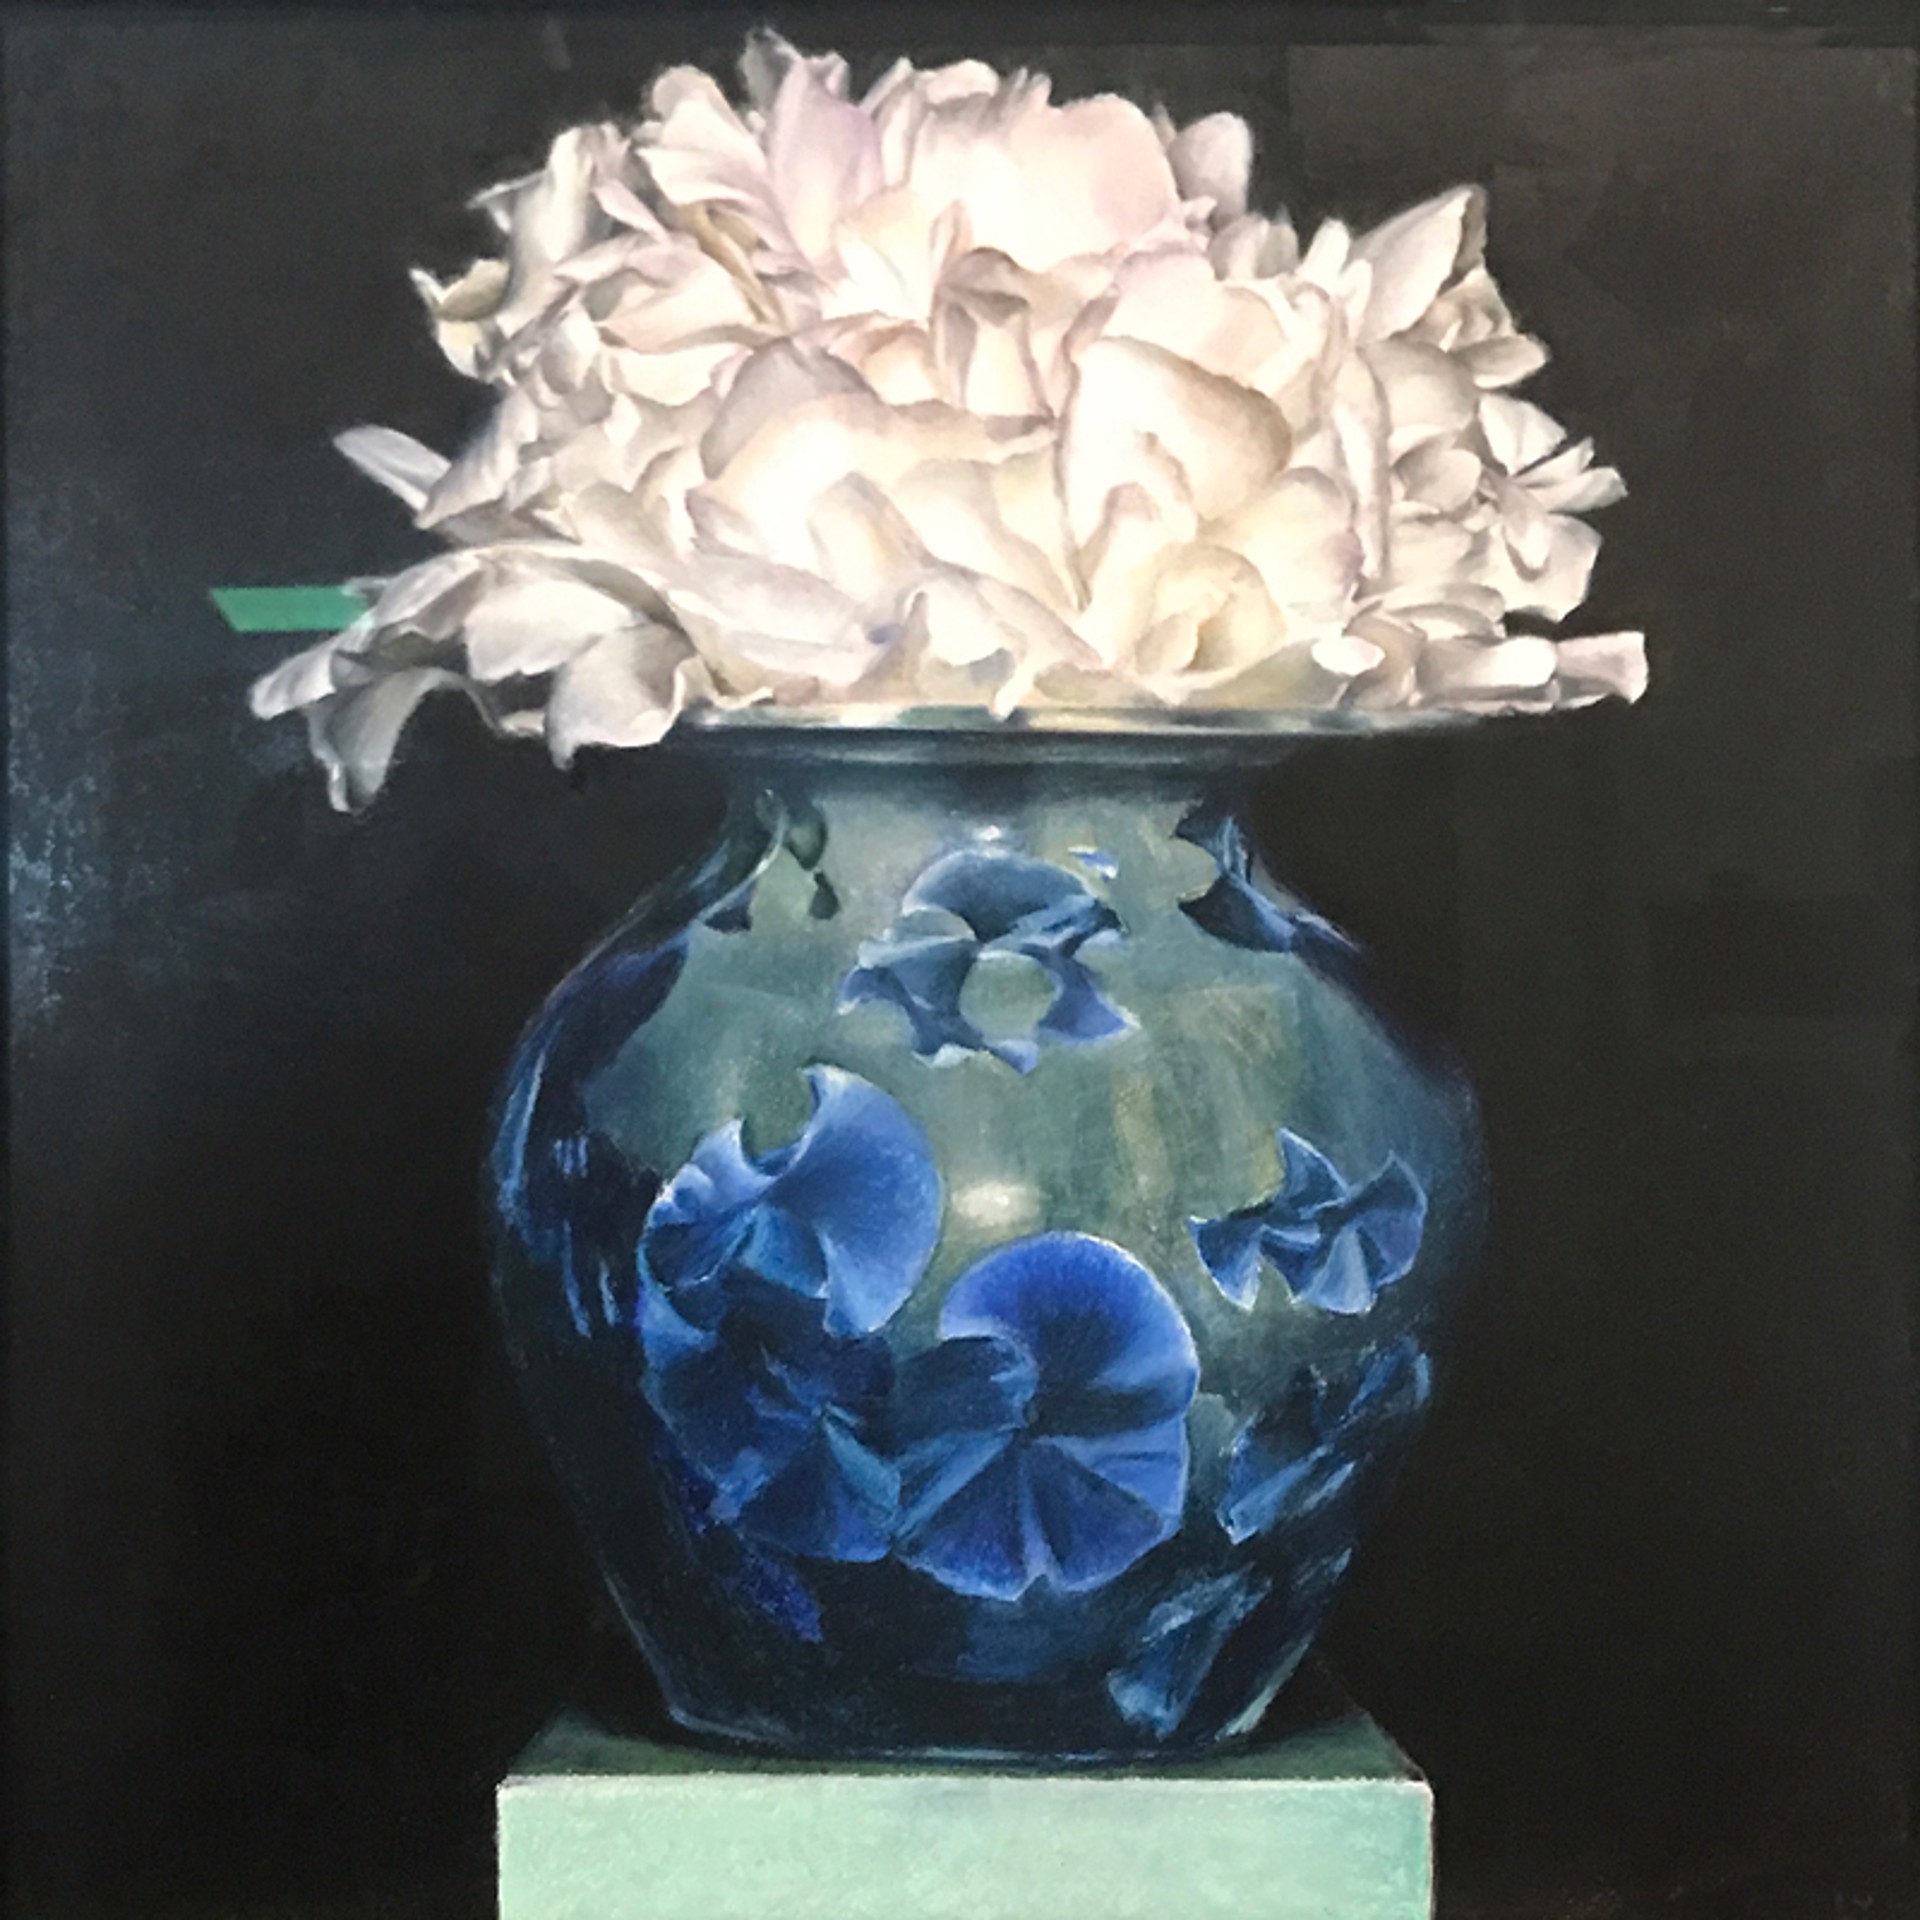 White Peony in Blue Vase by Stephanie Neely